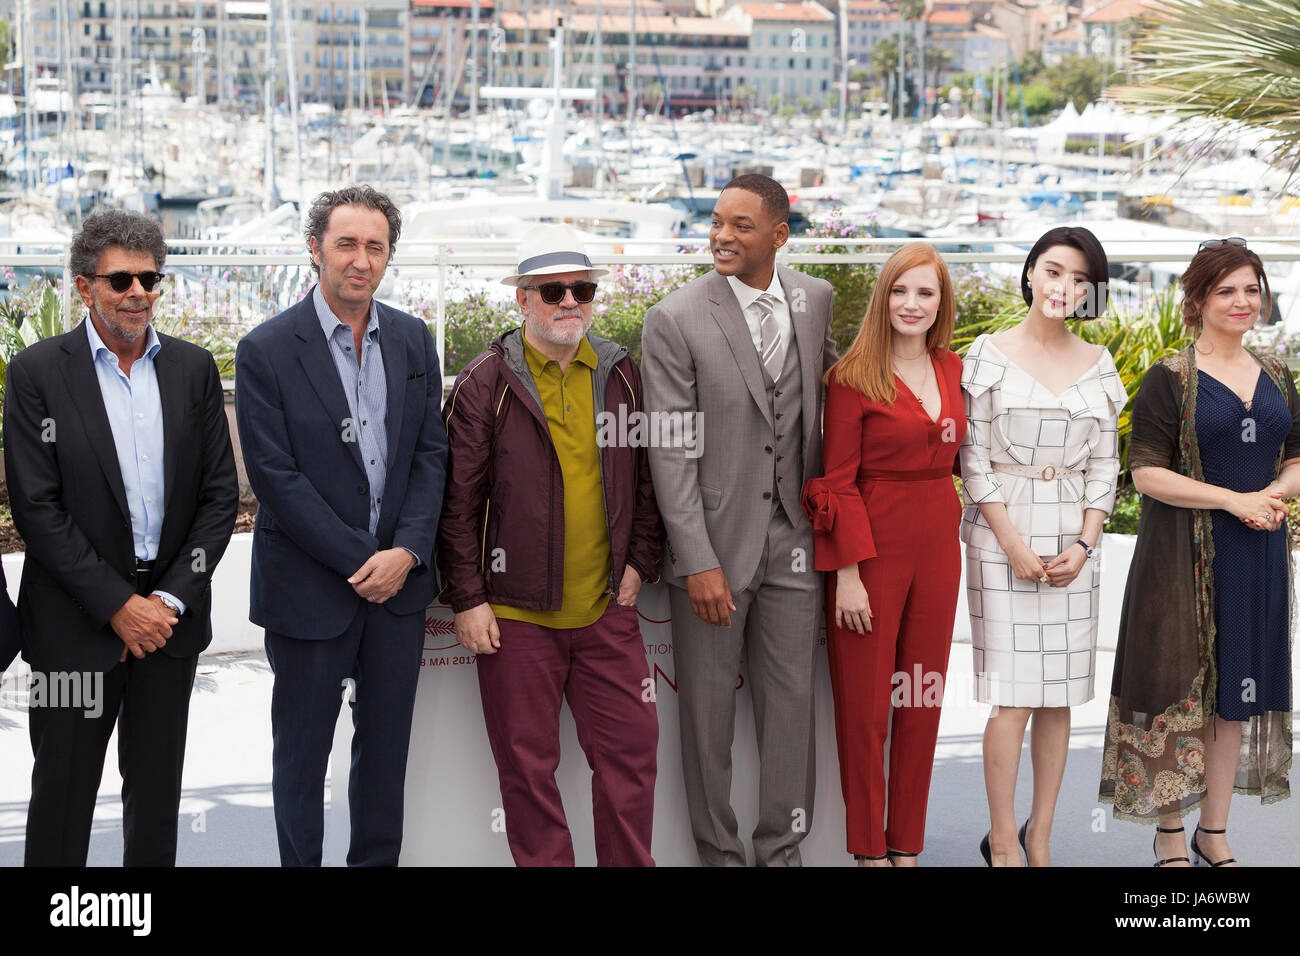 CANNES, FRANCE - MAY 17: Gabriel Yared, Paolo Sorrentino, Pedro Amoldovar, Will Smith, Jessica Chastain, Fan Bingbing, Agnes Jaoui attends the Jury photocall during the 70th annual Cannes Film Festival at Palais des Festivals on May 17, 2017 in Cannes, France. Laurent Koffel/Alamy Live News Stock Photo